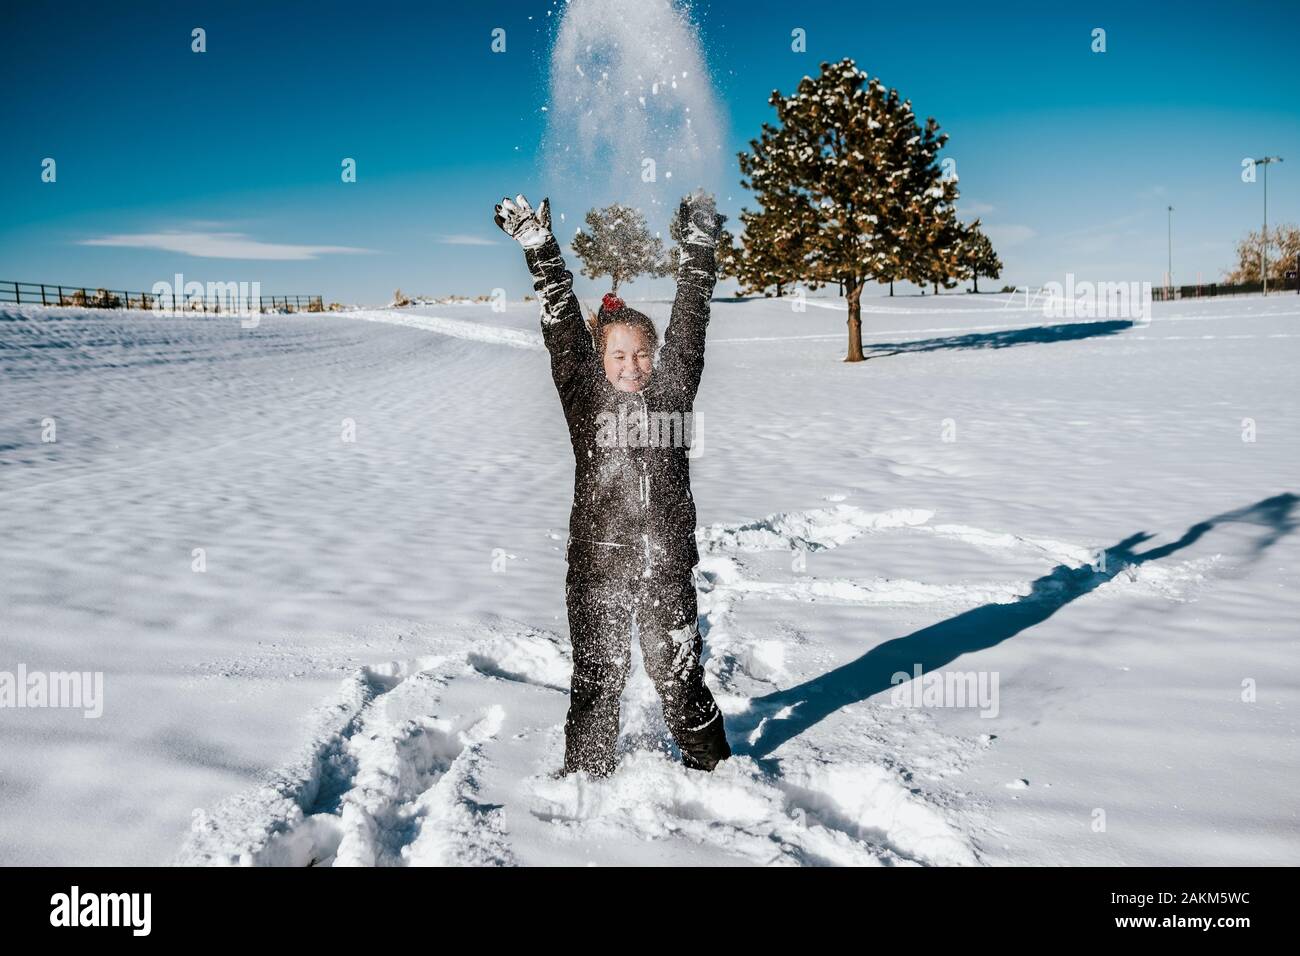 action shot of girl throwing snow in field Stock Photo